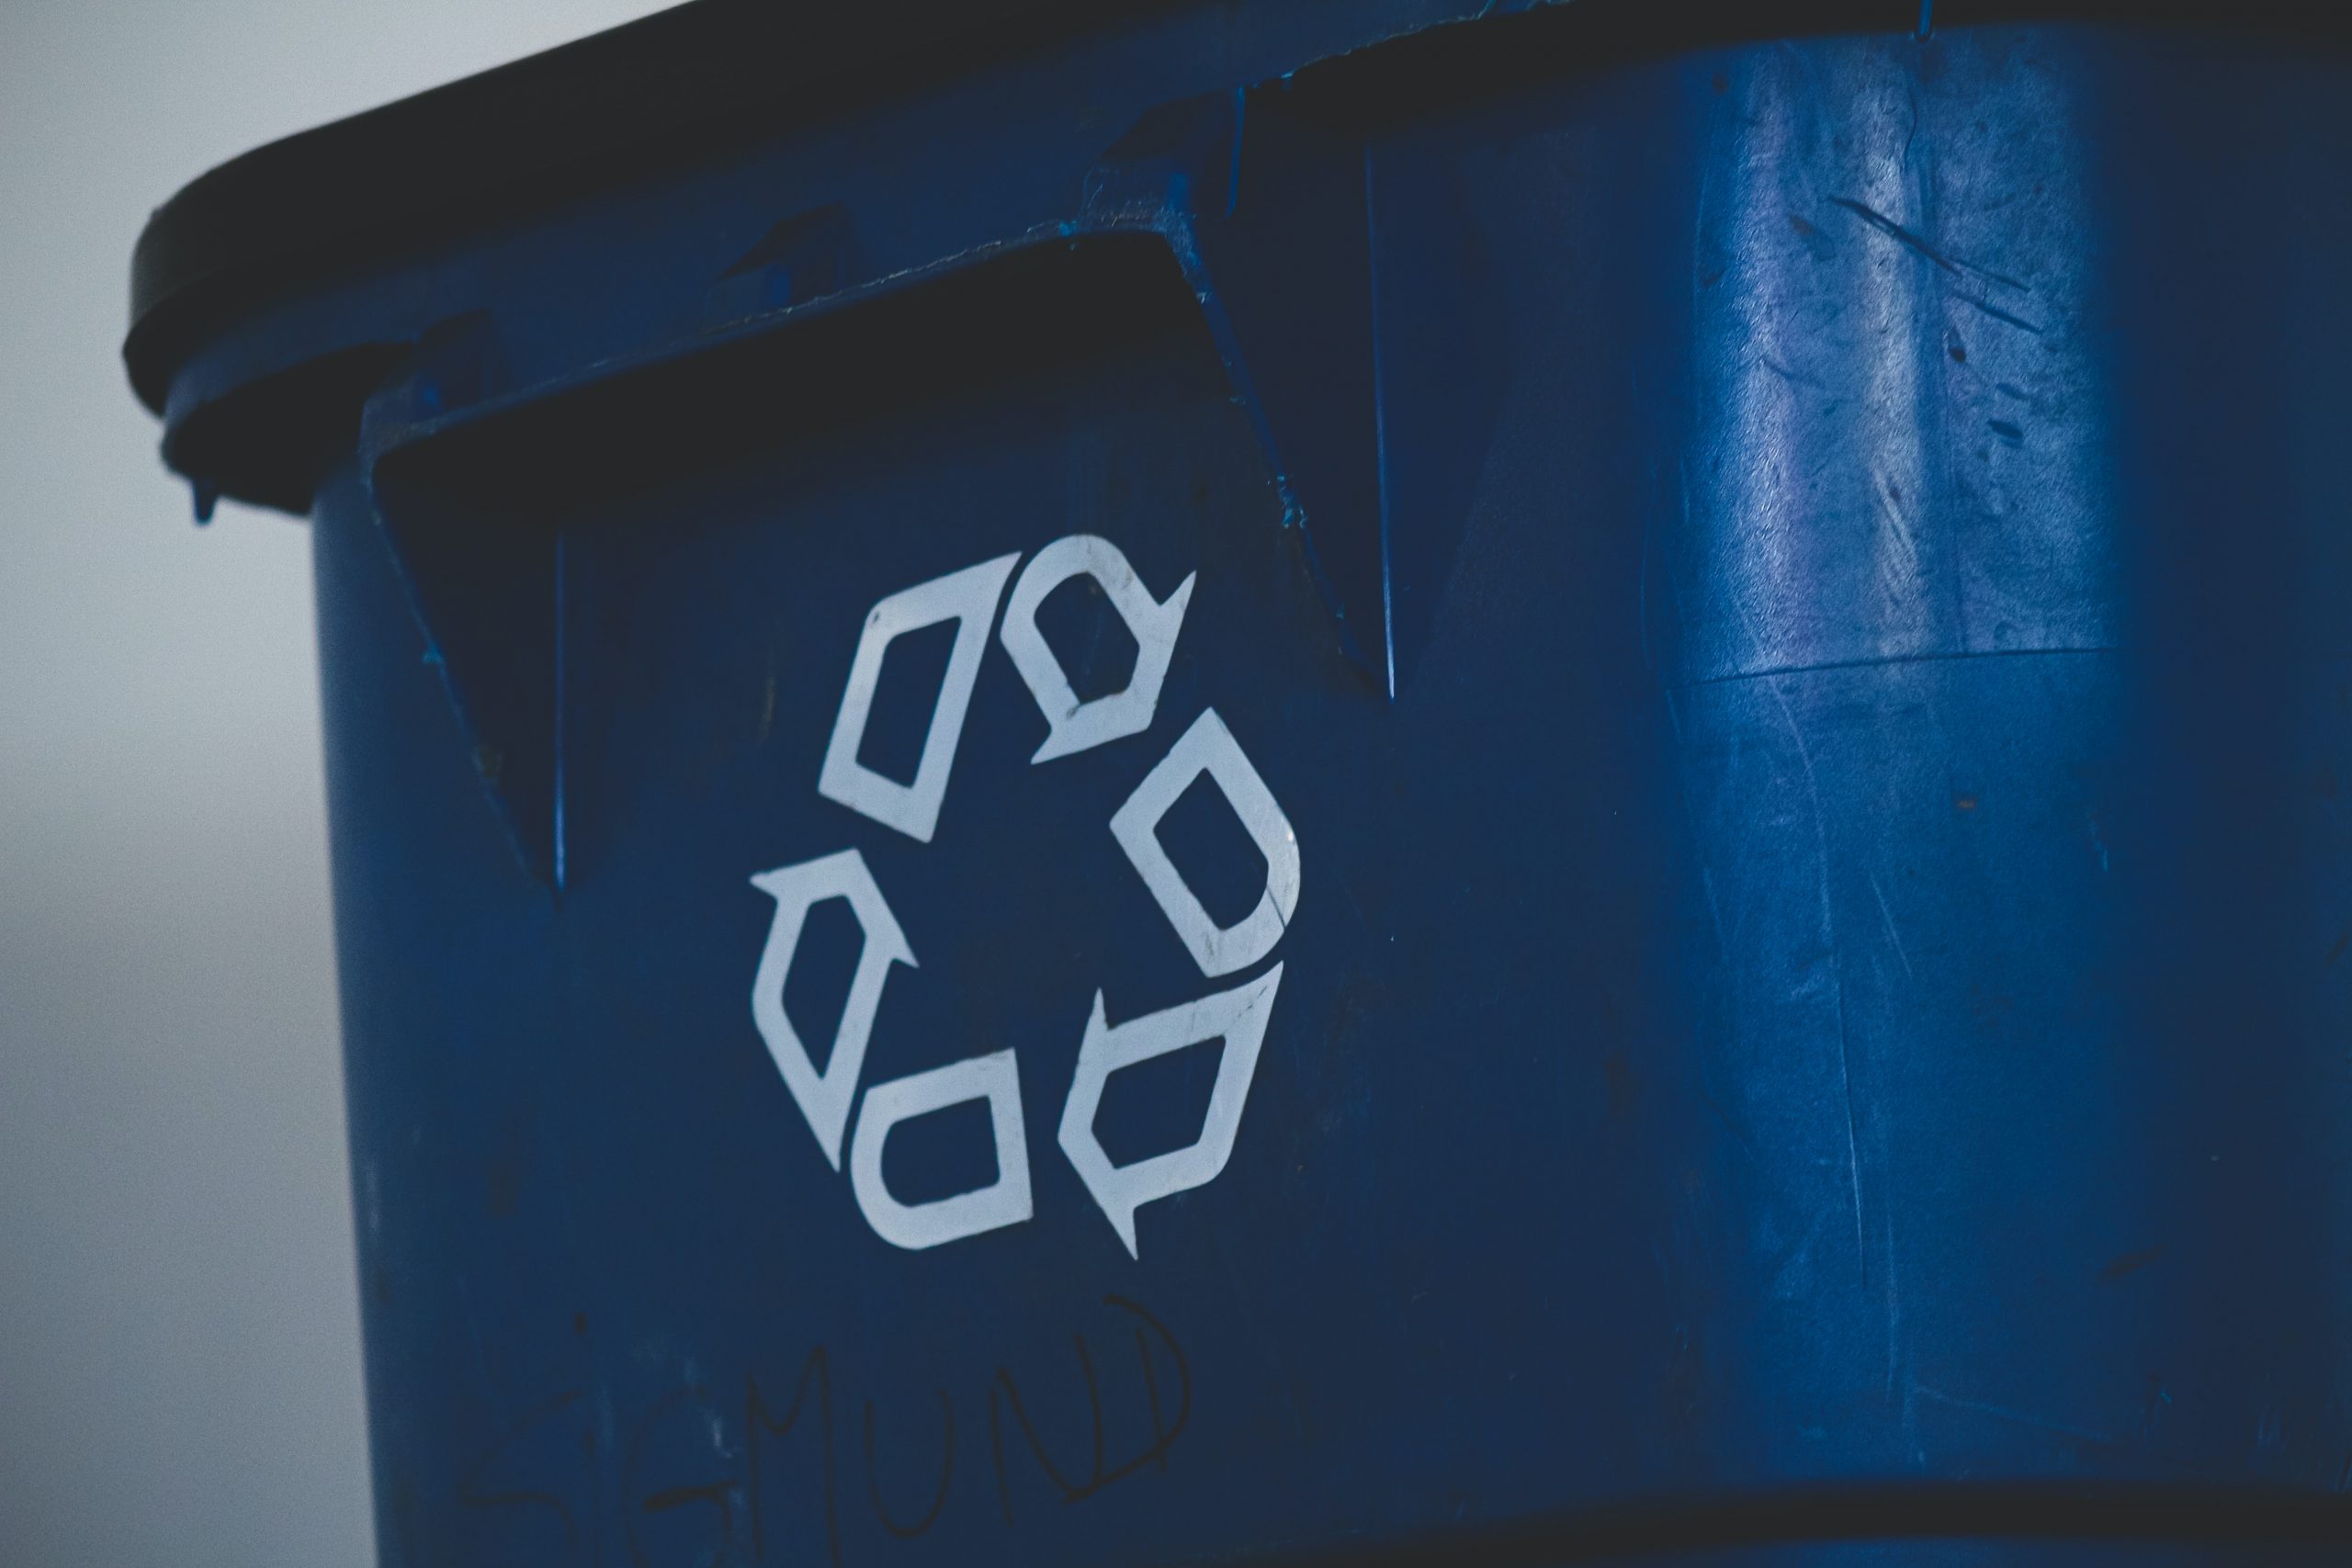 recycling bin zoomed in on the recycle sign